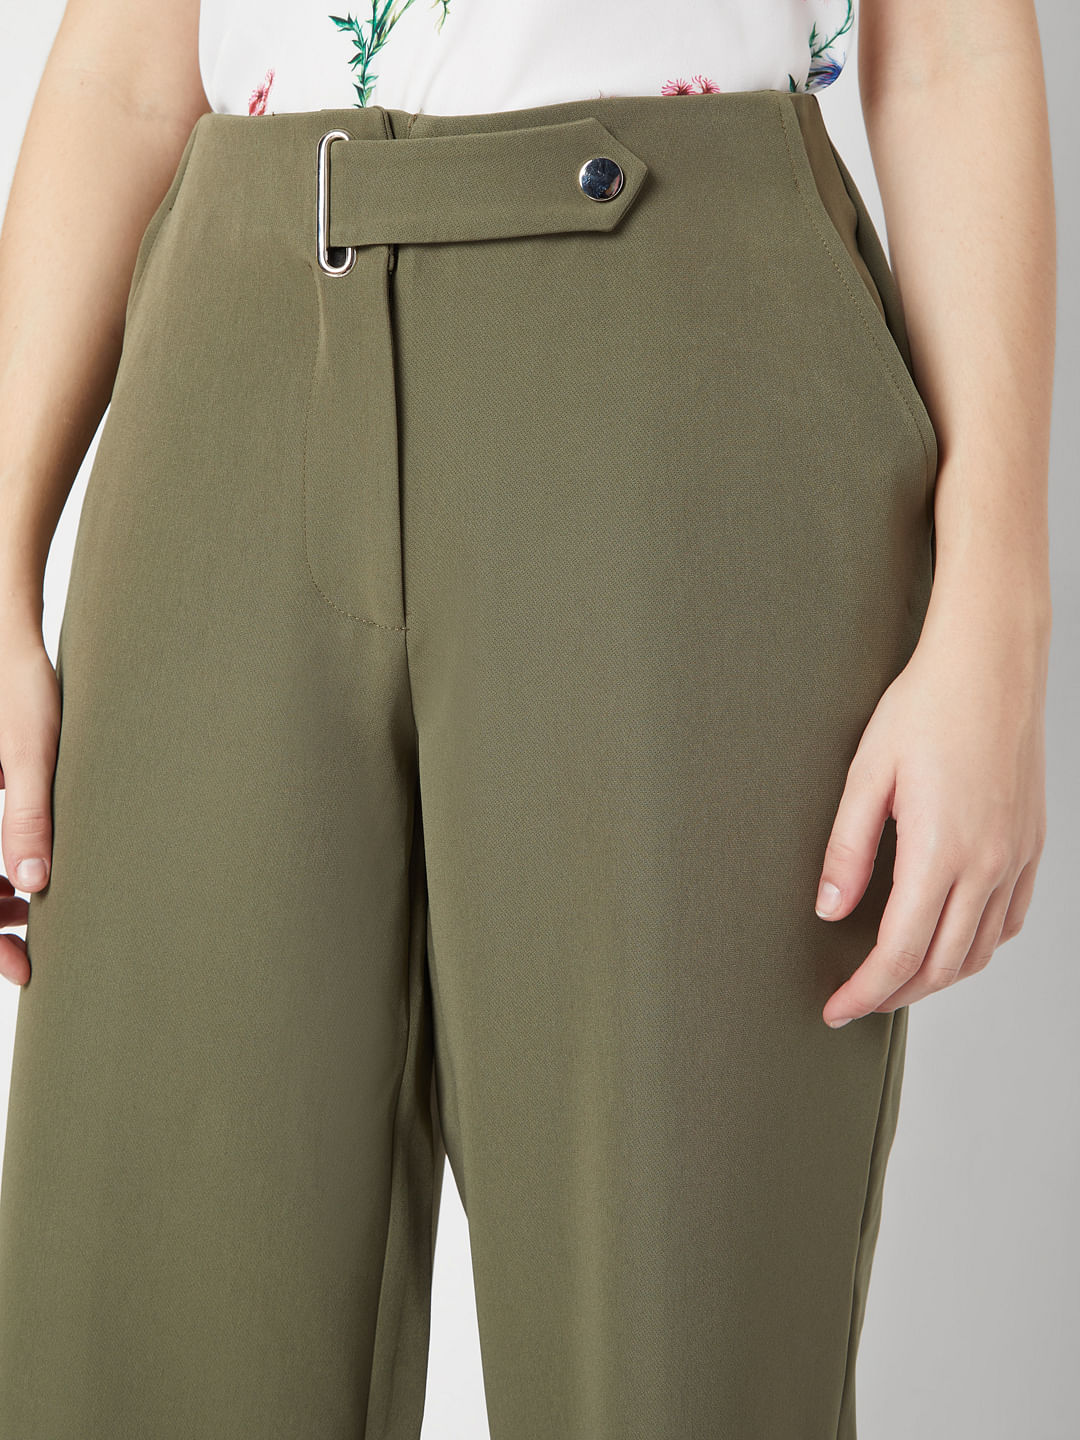 Forest Green Dress Pants  Green High Waisted Pants  Trousers  Lulus